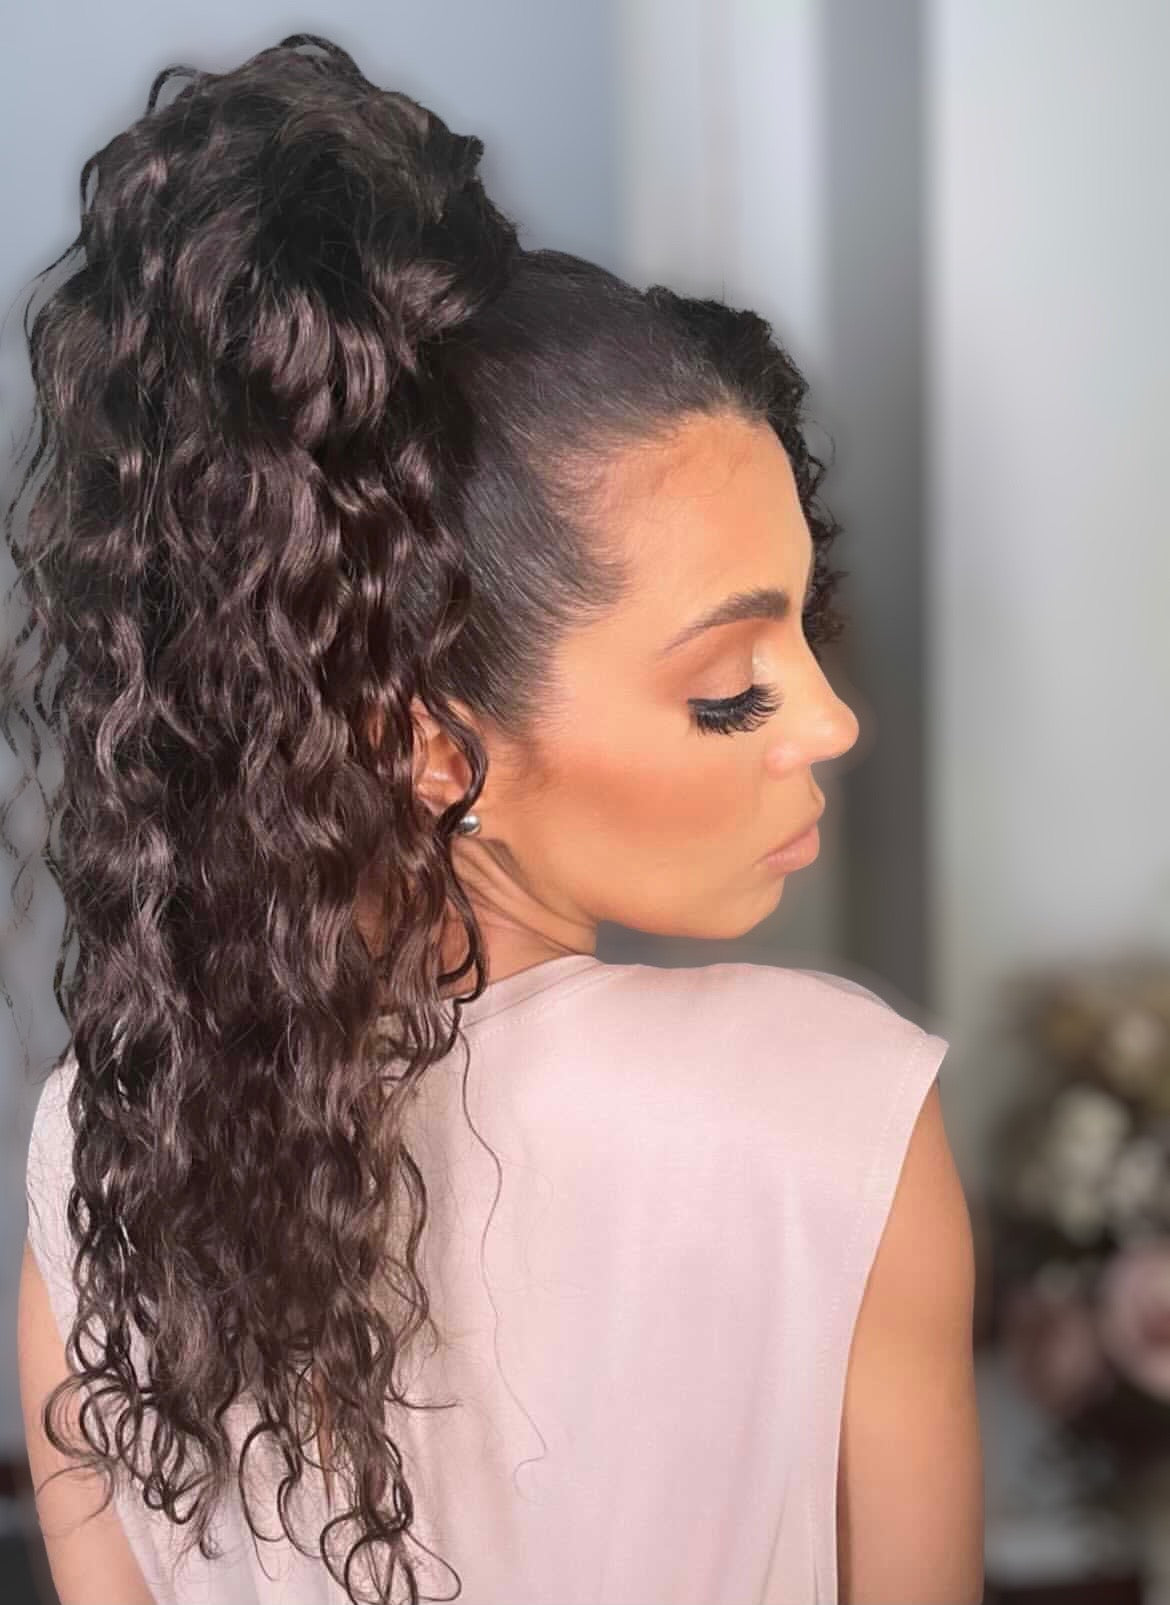 Curly Ponytail Human Hair Extensions #8/22 Ash Brown & Sandy Blonde Mix